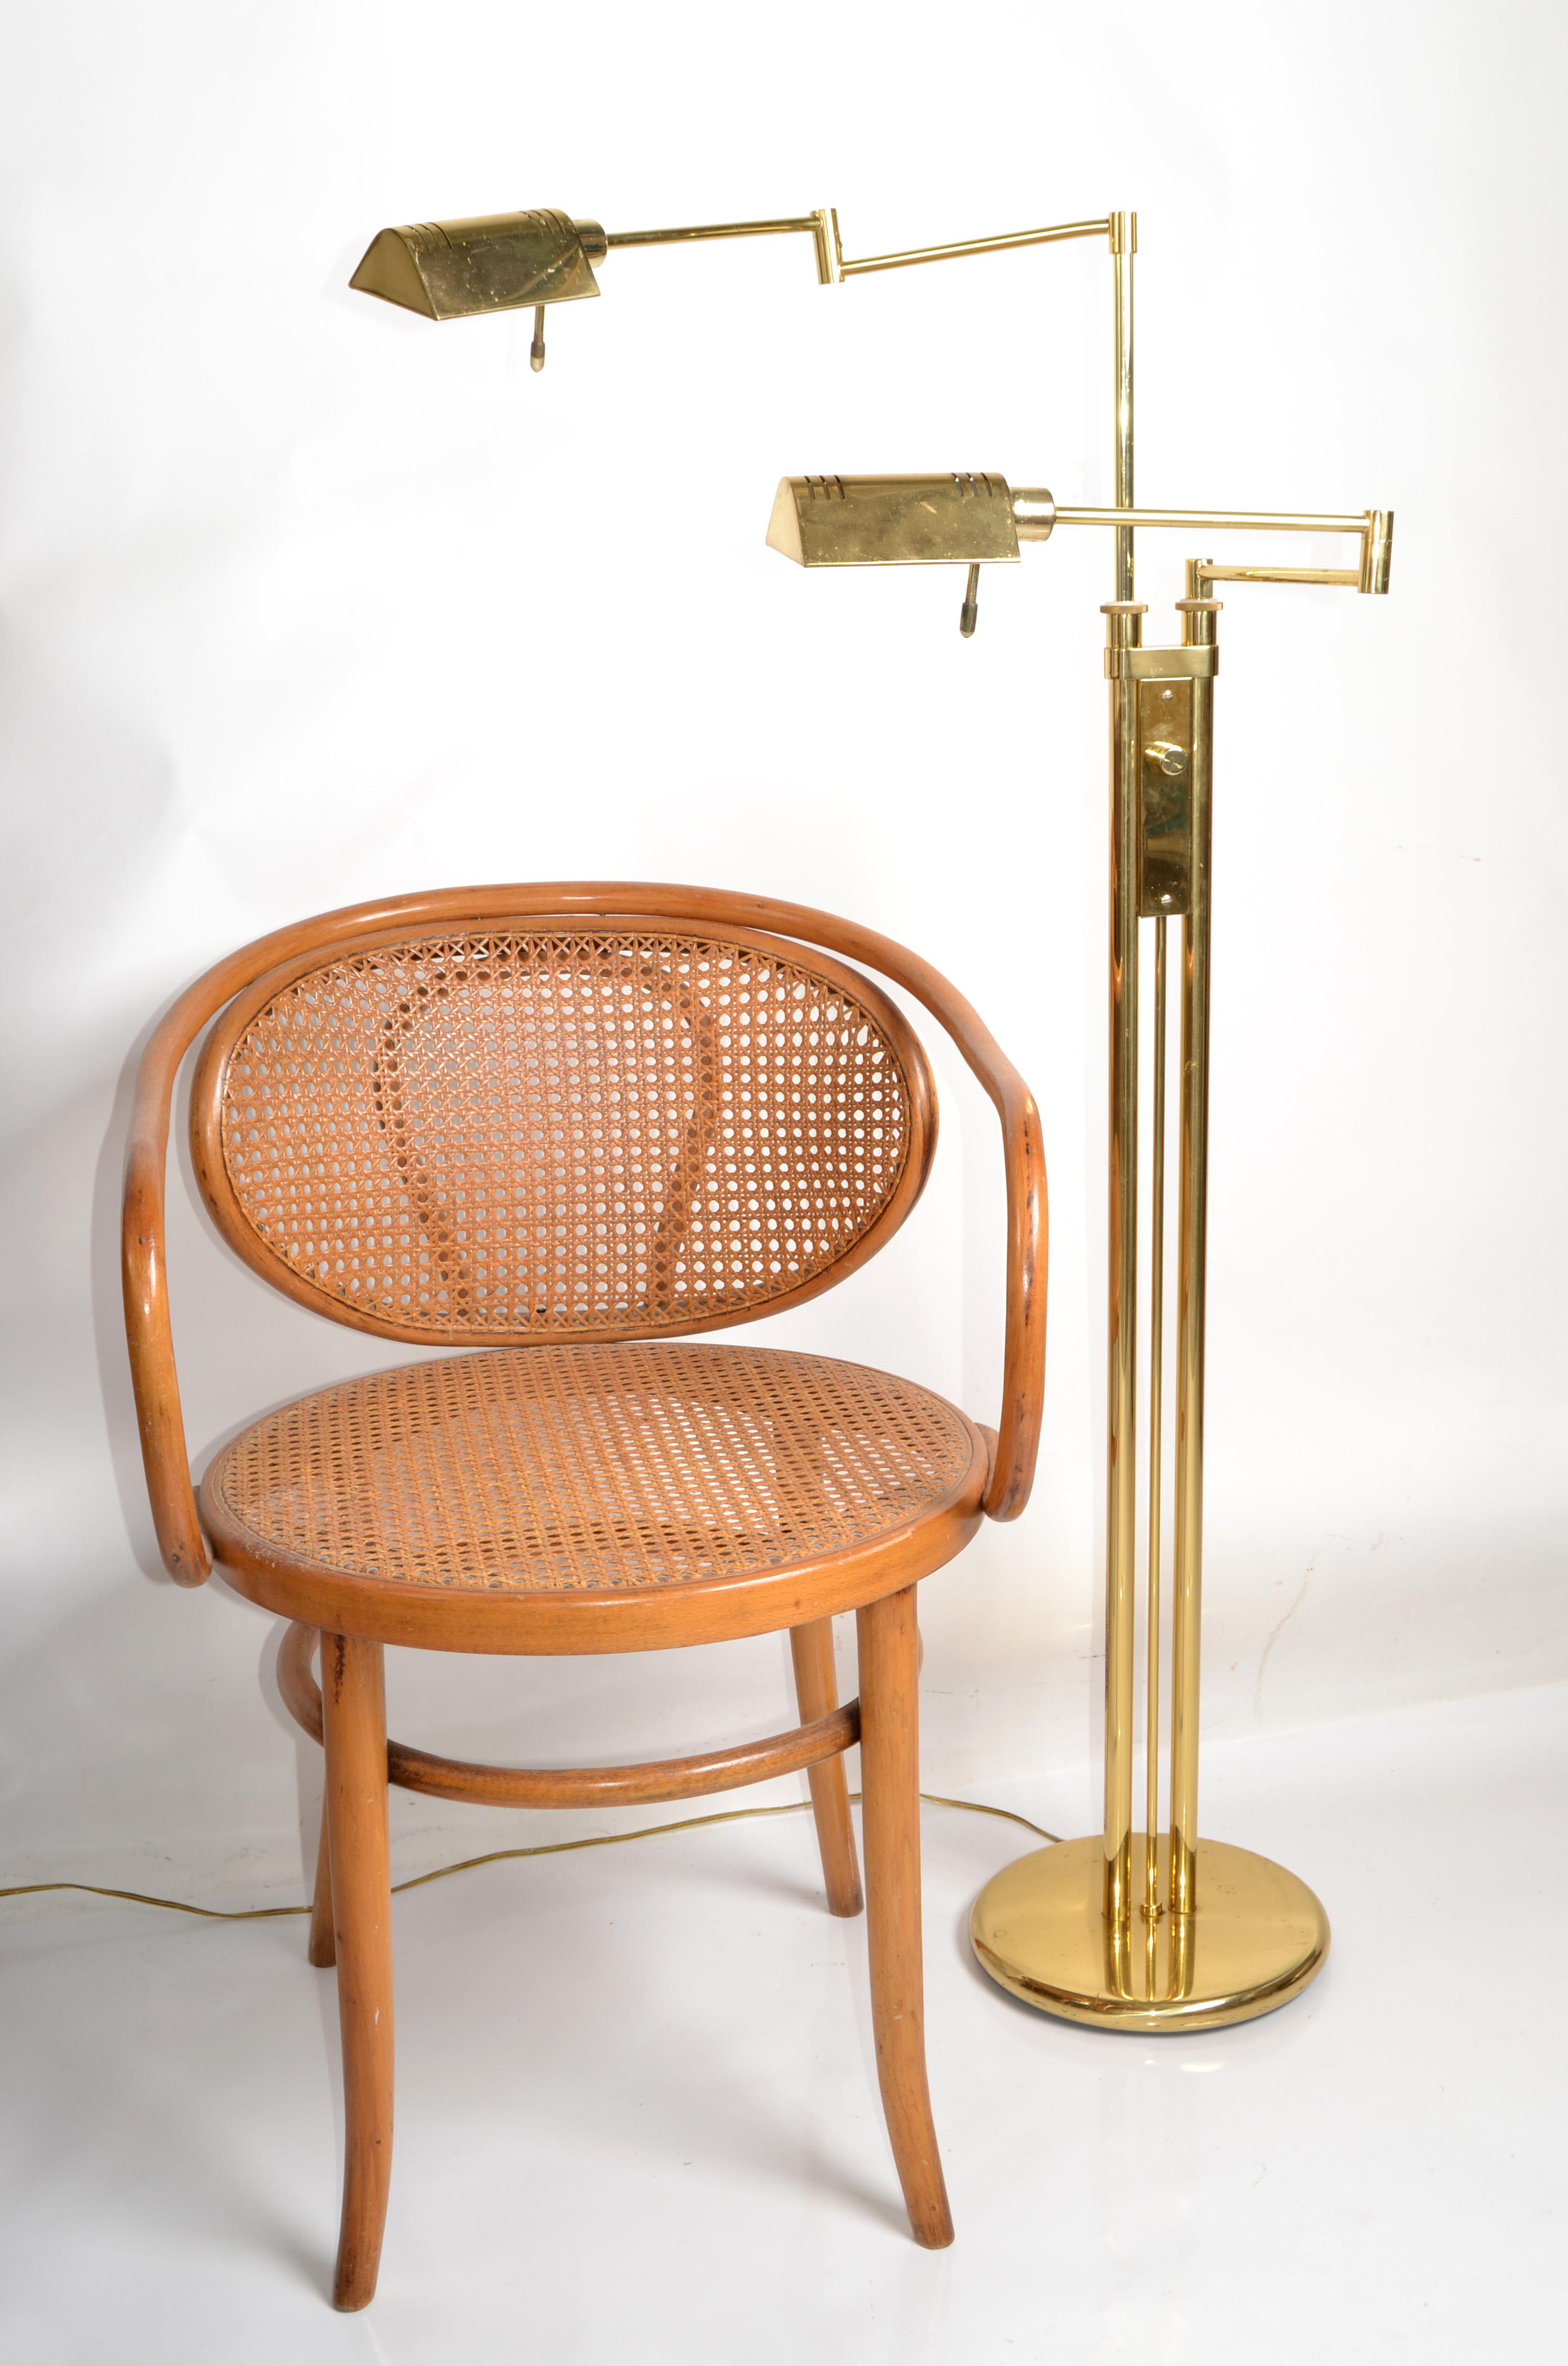 Hand-Crafted Brass Holtkoetter Leuchten Two Arm Swing Floor Lamp Mid-Century Modern Marked For Sale